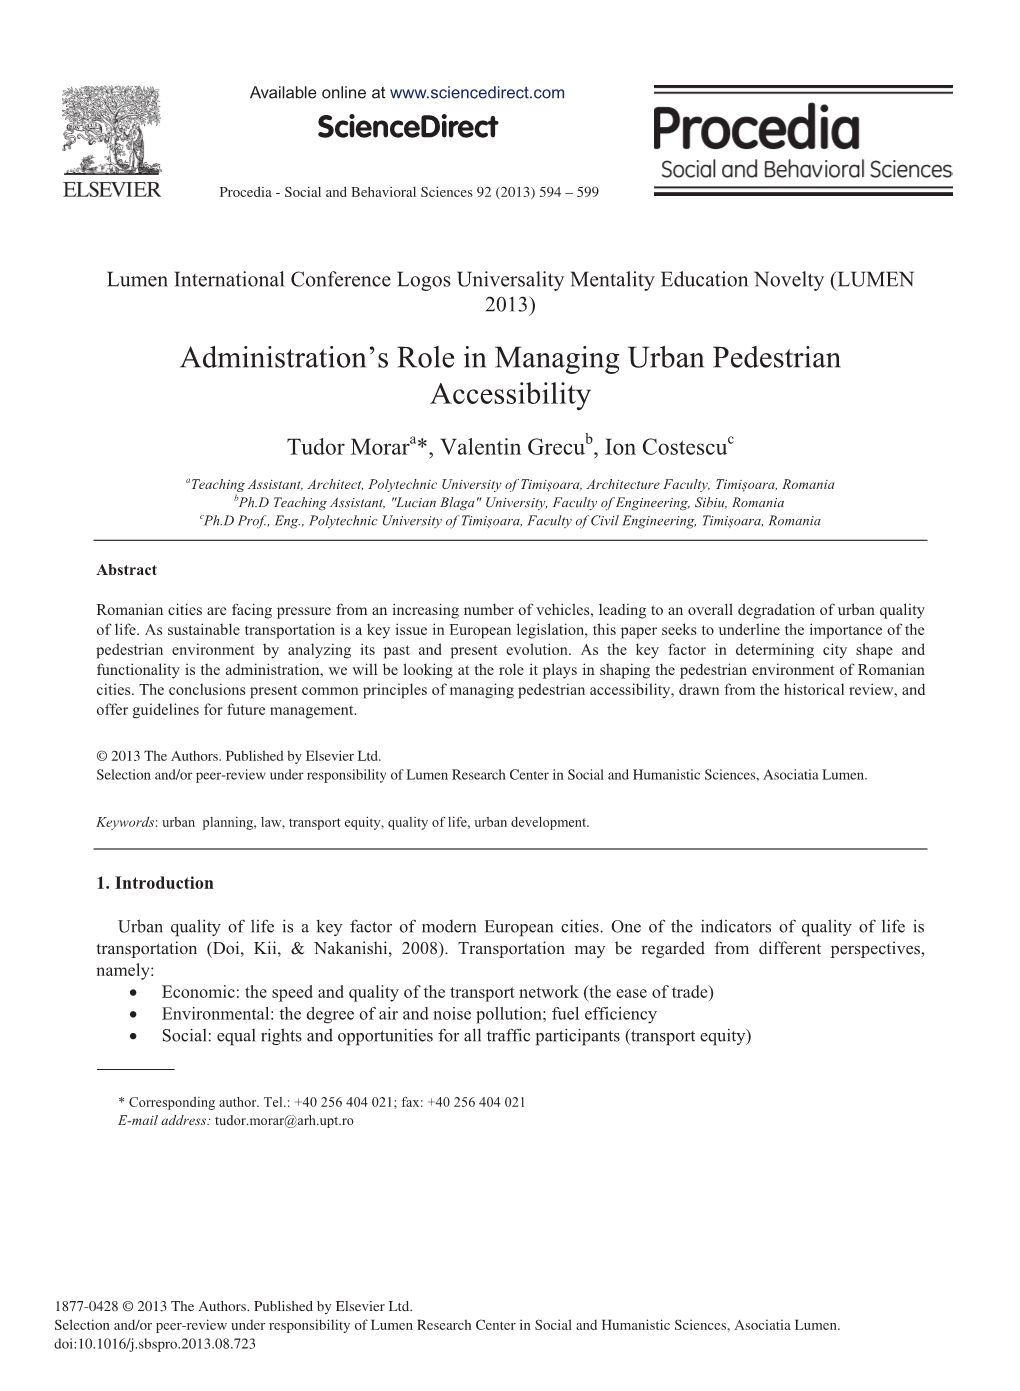 Administration's Role in Managing Urban Pedestrian Accessibility